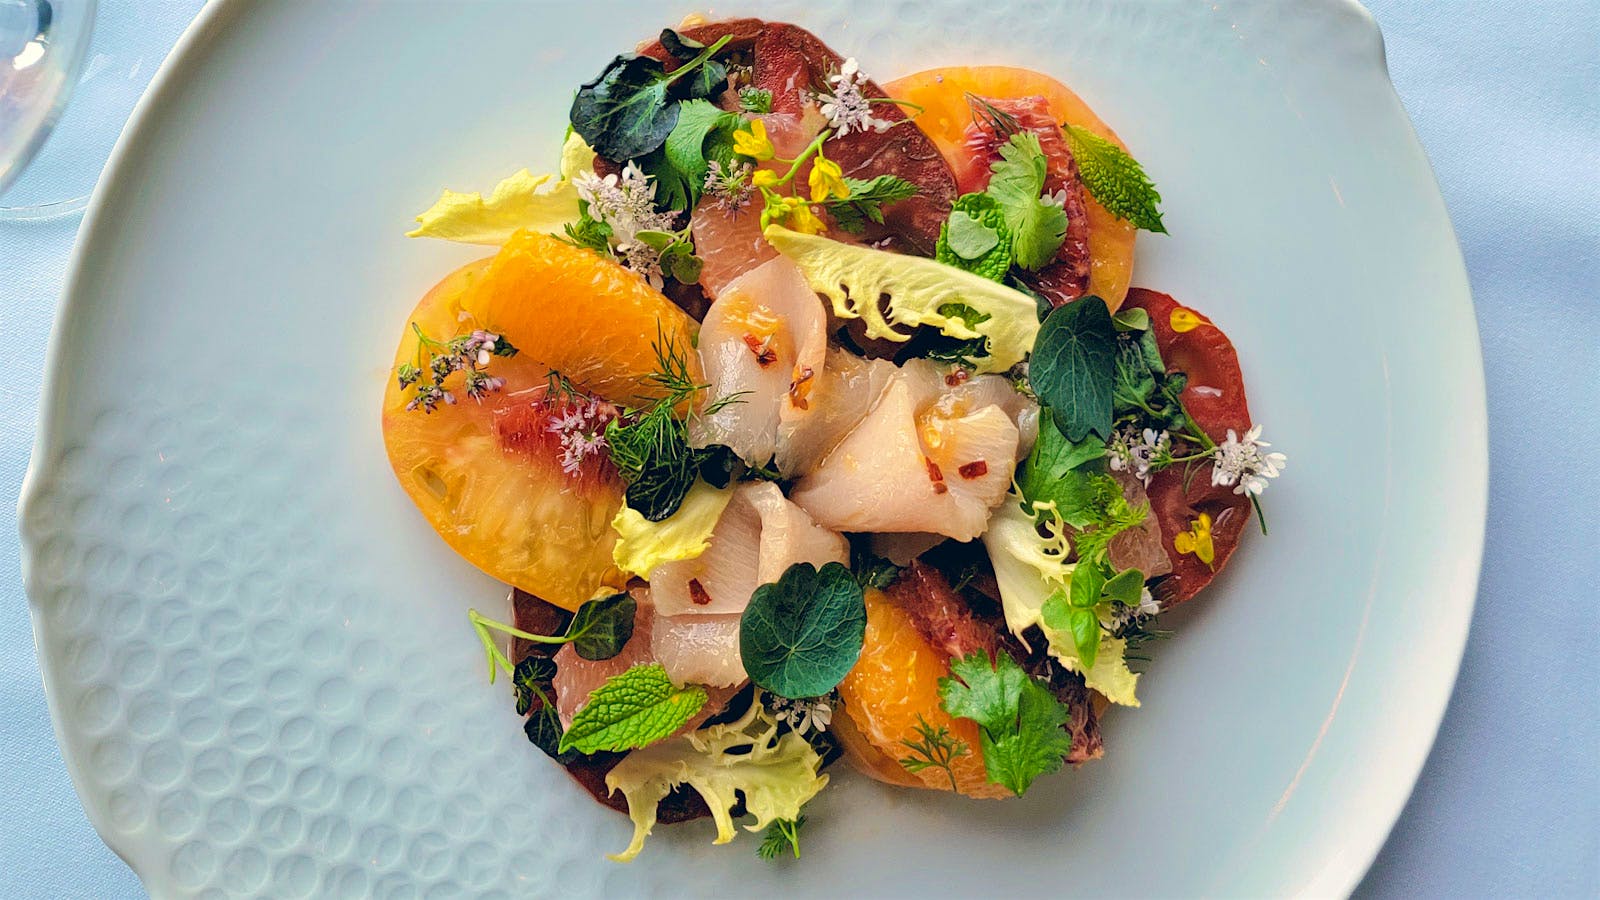 Summer Entertaining: Boulevard’s Halibut Ceviche with Oranges